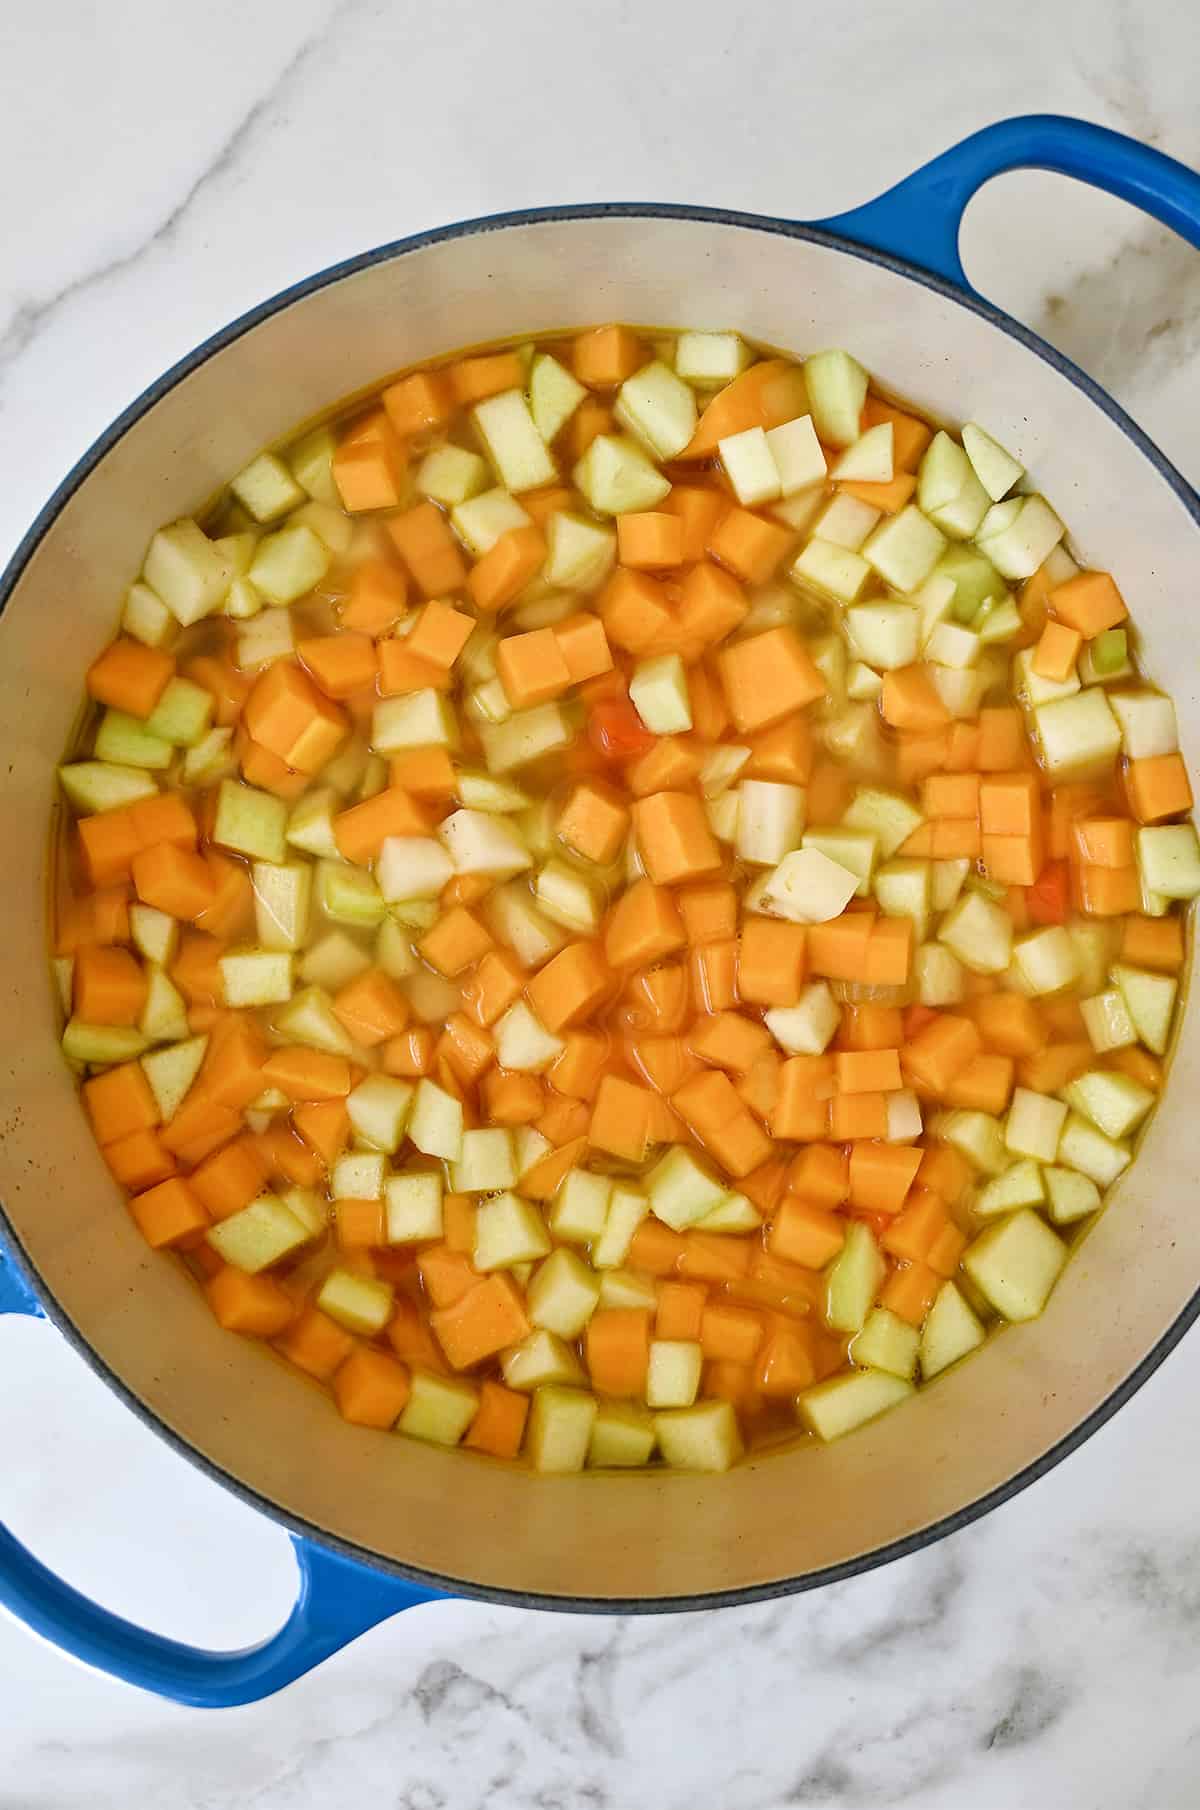 A large stockpot containing chopped butternut squash, onions, carrots, celery and apples in chicken stock.